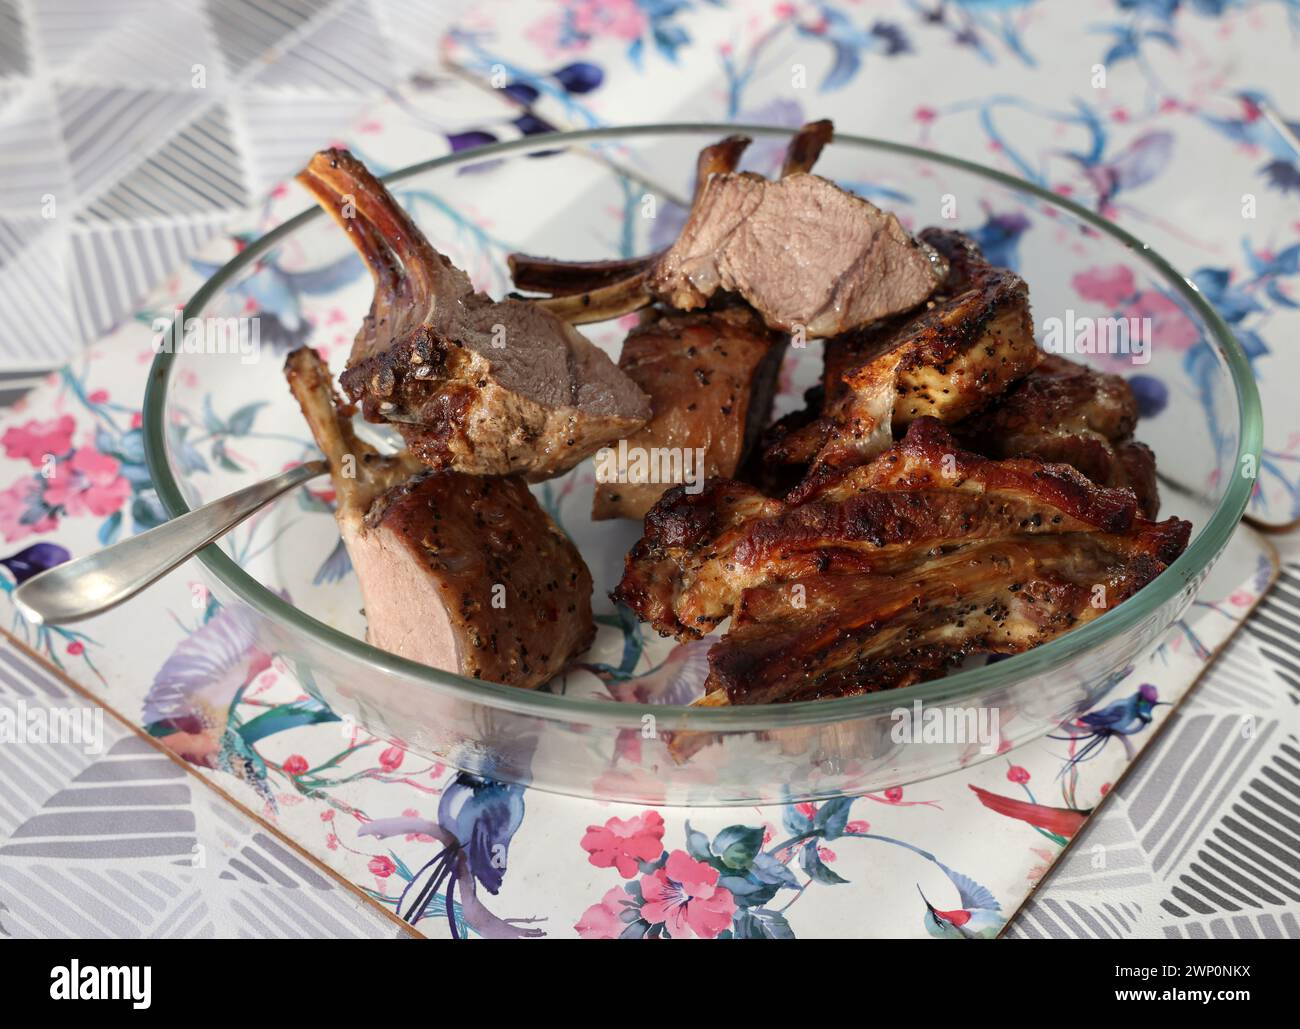 Baked, ready-to-eat saddle of lamb in a glass dish Stock Photo